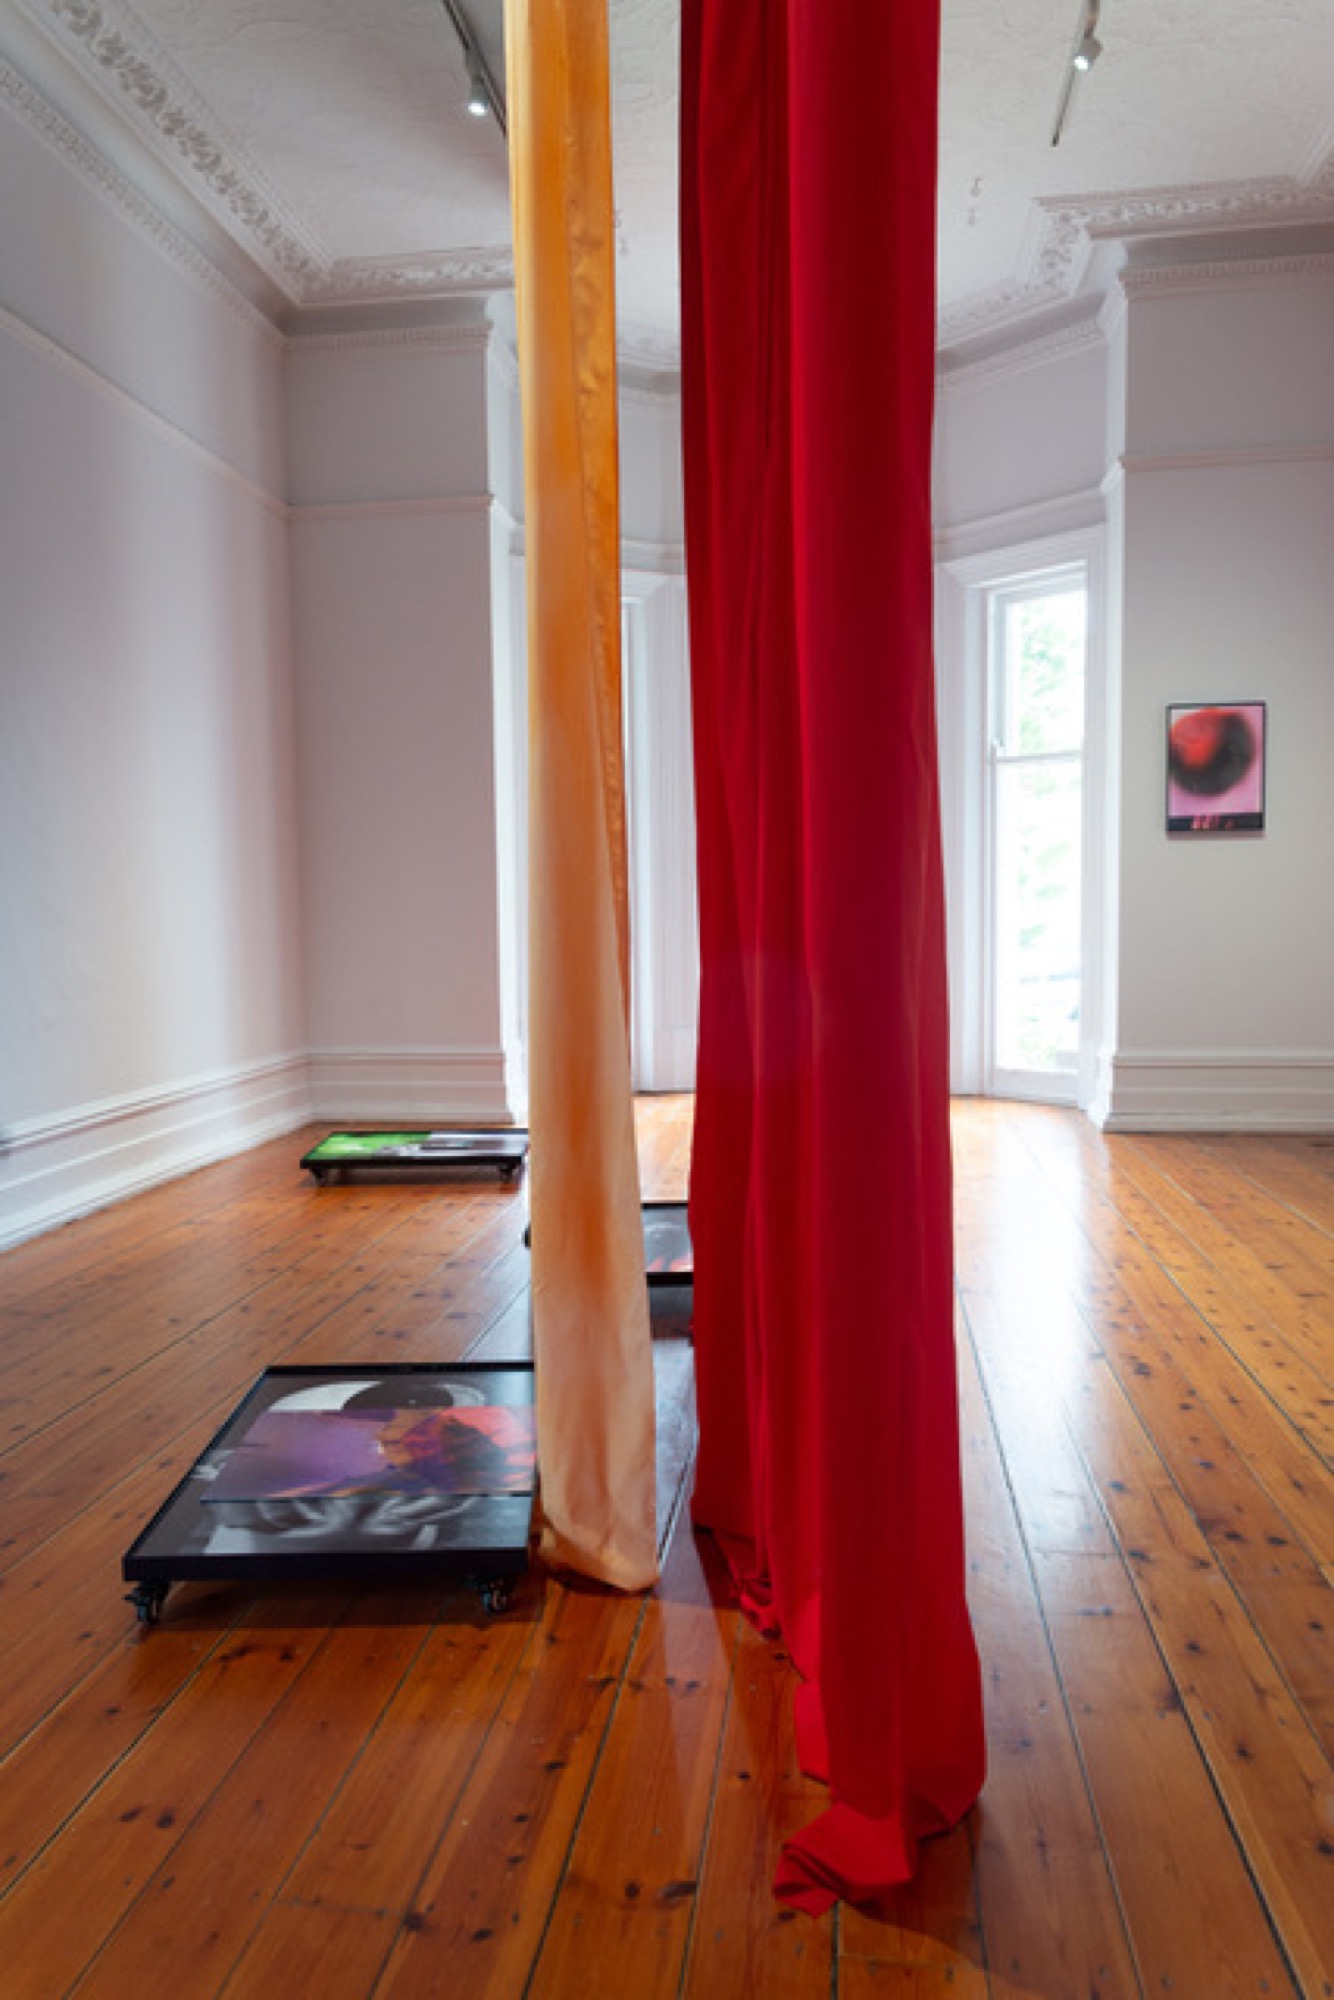 Installation view of Ruth Höflich, <em>To Feed your Oracle,</em> 2021. Photo: Theresa Harrison Photography